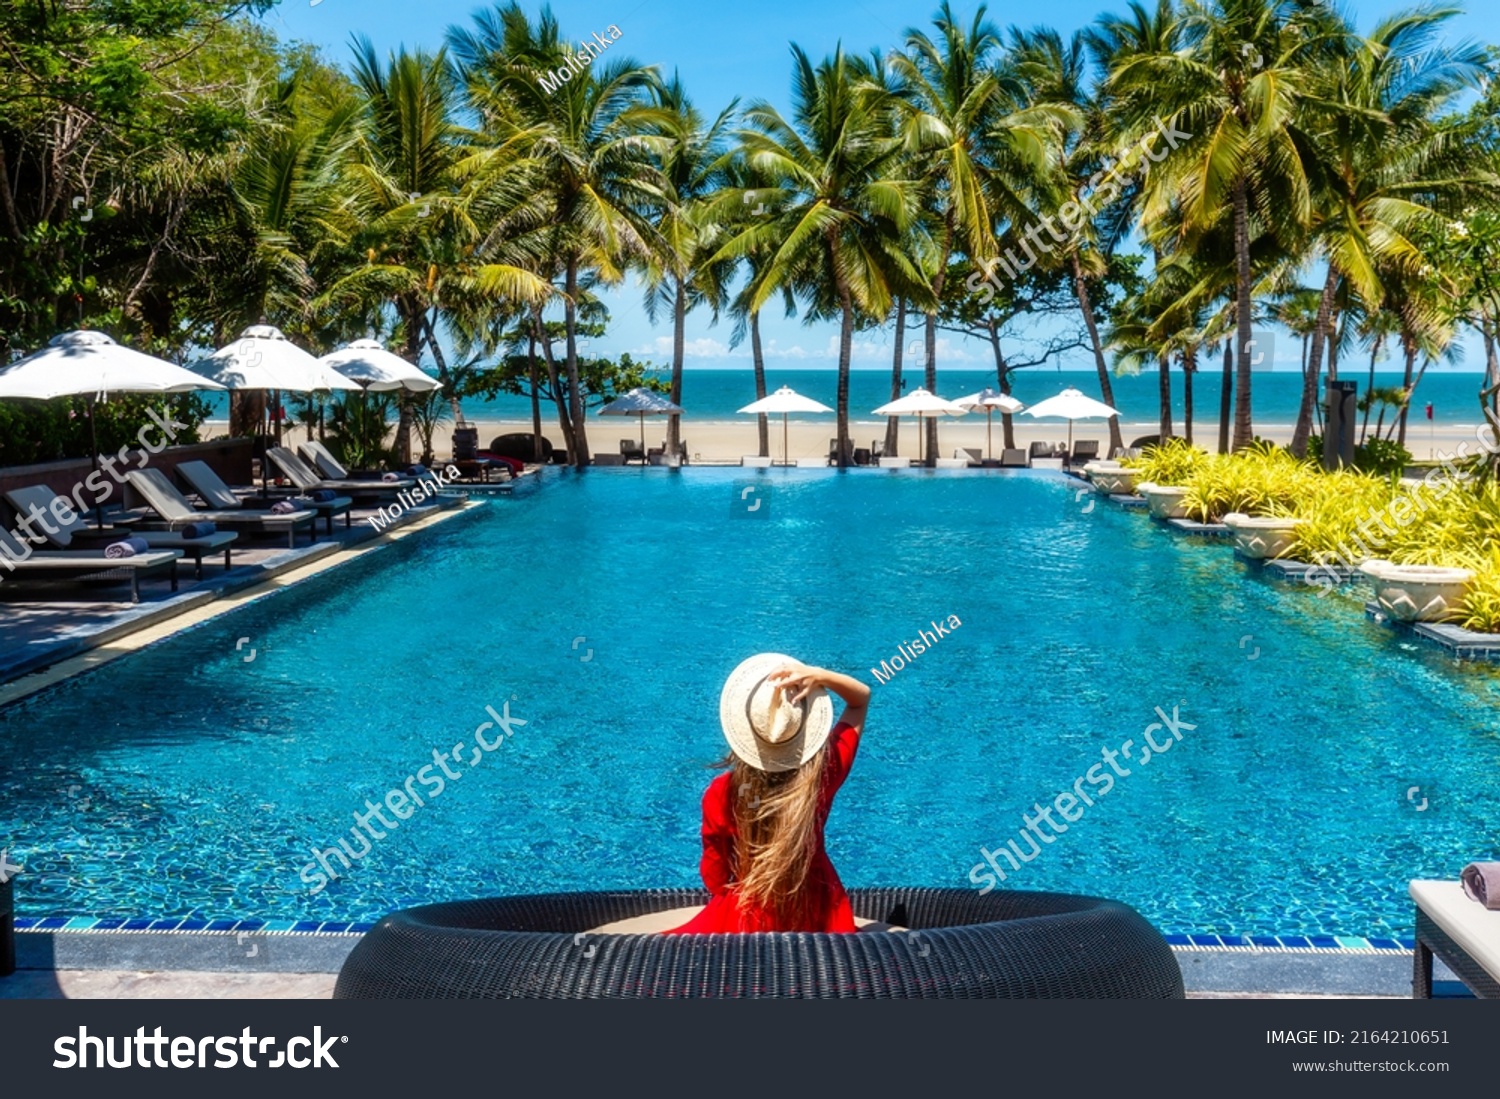 Luxury beach vacation in tropical beach hotel. Tourist woman in red dress relax near blue swimming pool in modern resort. Female traveler on sea vacation. #2164210651